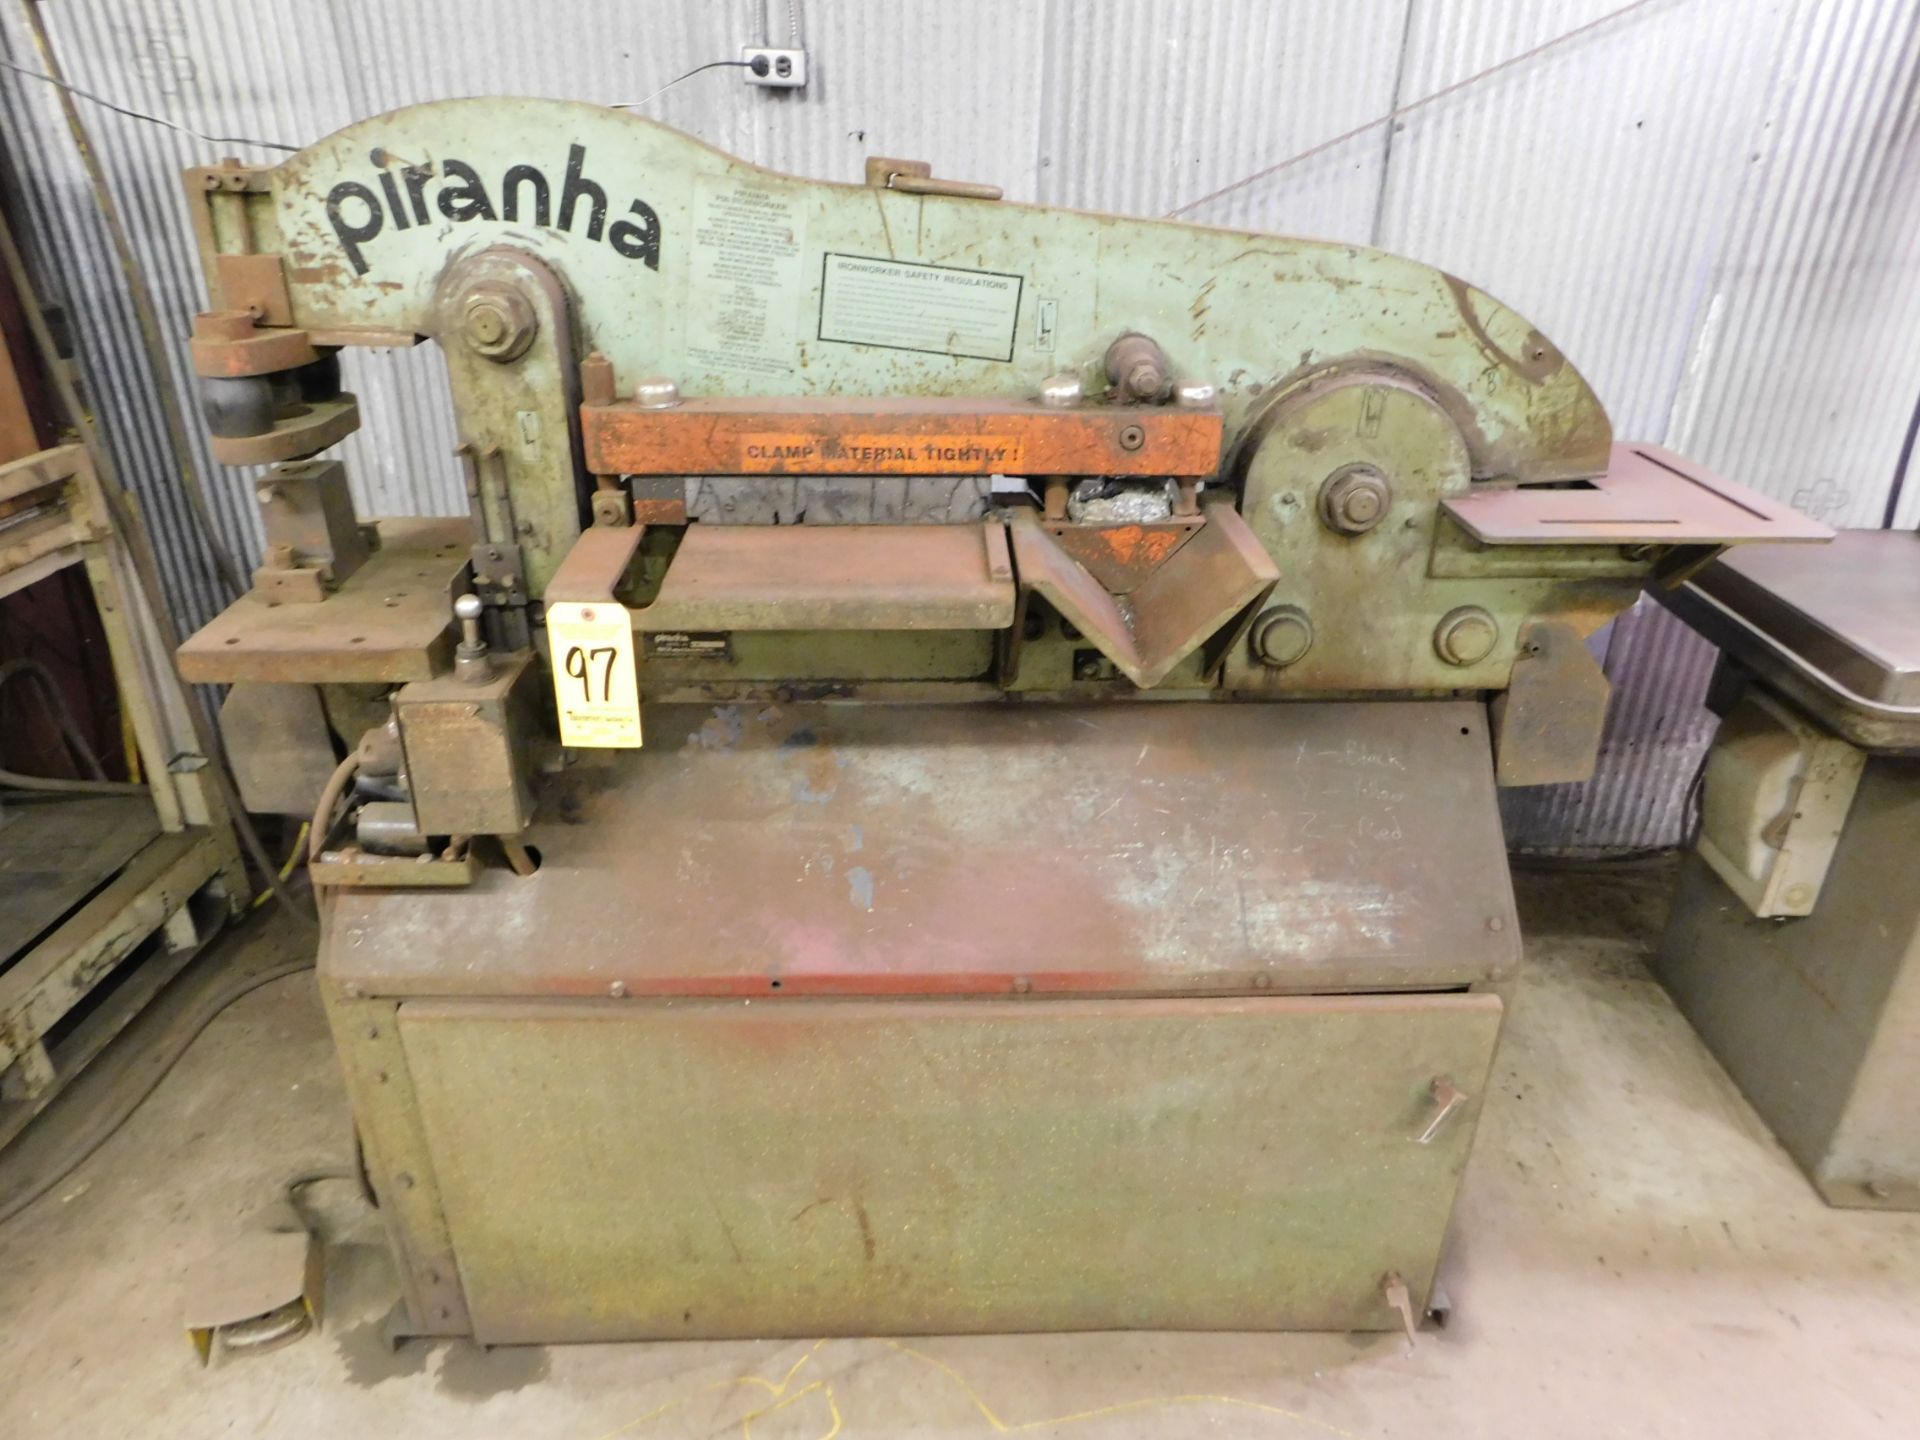 Piranha Model P50 Hydraulic Ironworker, s/n P50-4308, 50 Ton Capacity, 5 In. X 5 In. X 3/8 In. - Image 2 of 8